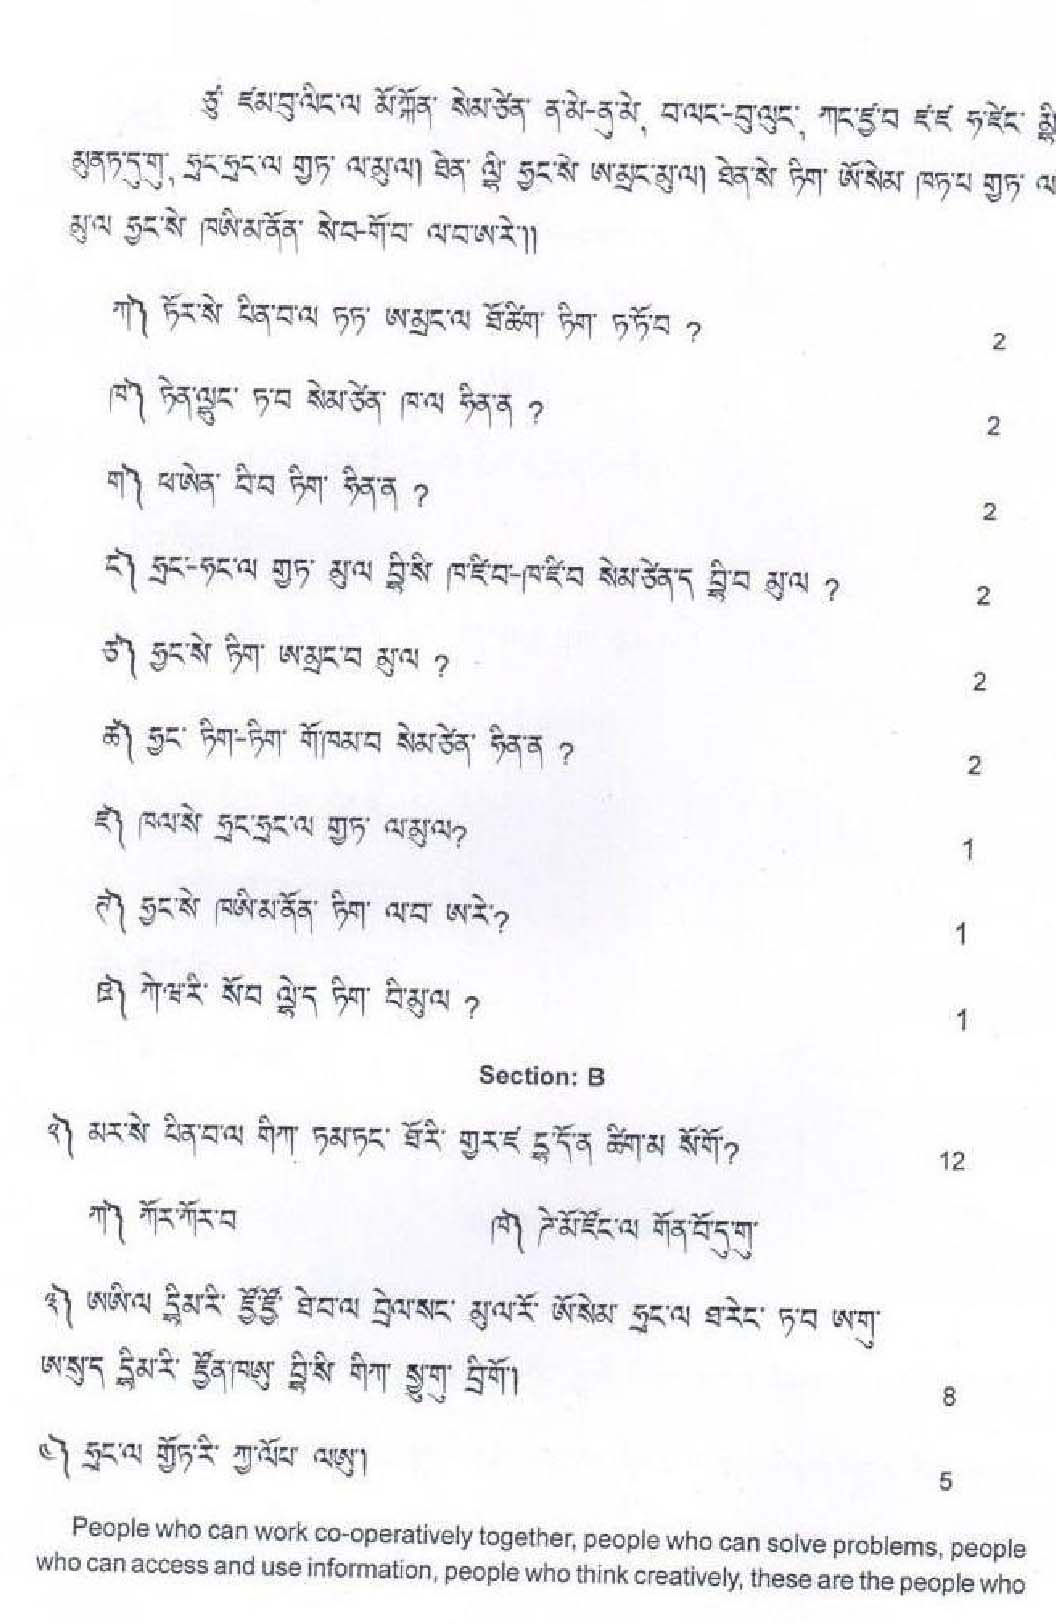 Tamang CBSE Class X Sample Question Paper 2018-19 - Image 2